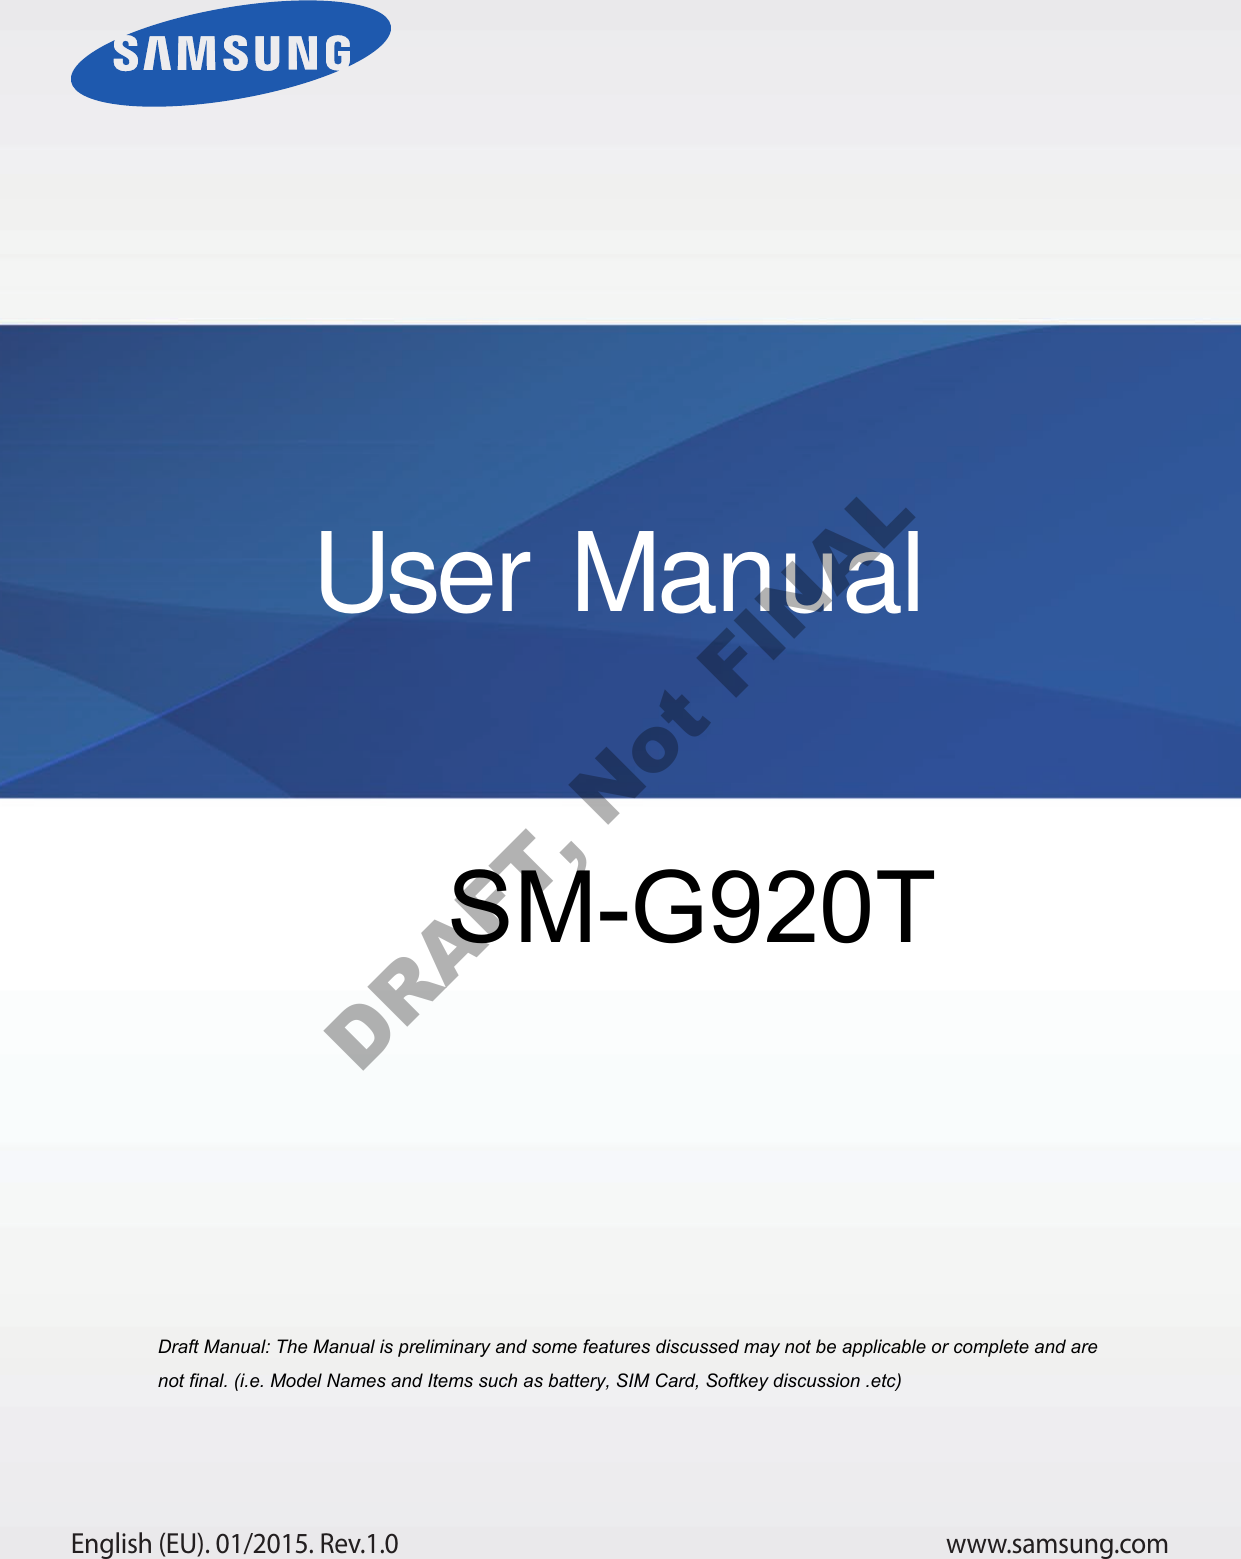 www.samsung.comUser ManualEnglish (EU). 01/2015. Rev.1.0Draft Manual: The Manual is preliminary and some features discussed may not be applicable or complete and are not final. (i.e. Model Names and Items such as battery, SIM Card, Softkey discussion .etc) SM-G920TDRAFT, Not FINAL